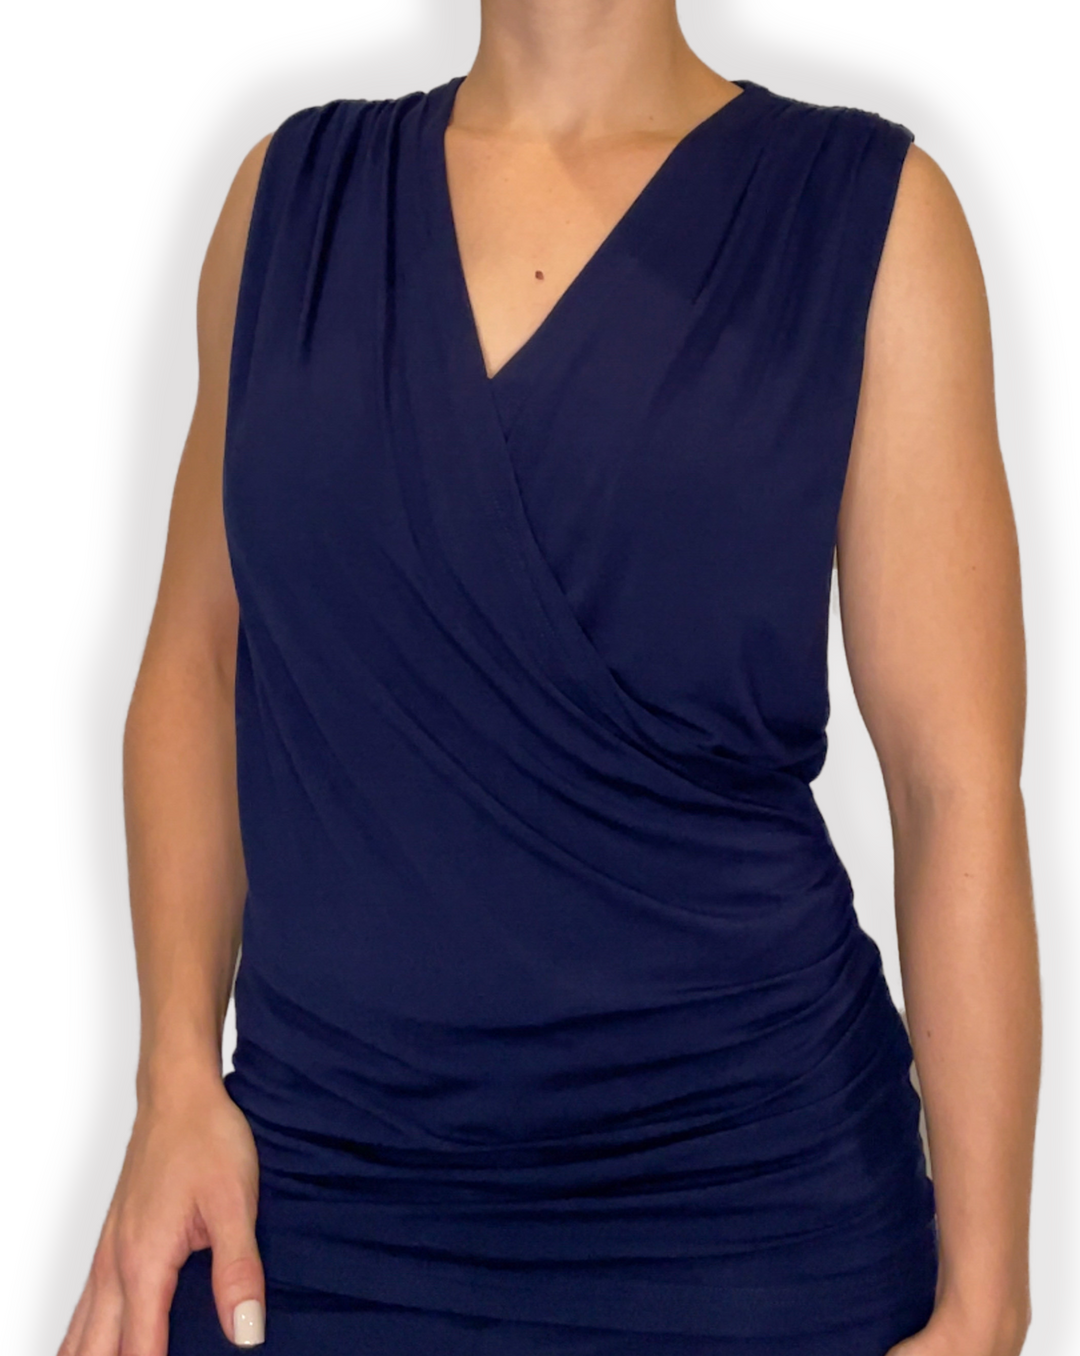 Stylish MELANIE Braless Bamboo Wrap Tank top in navy blue color